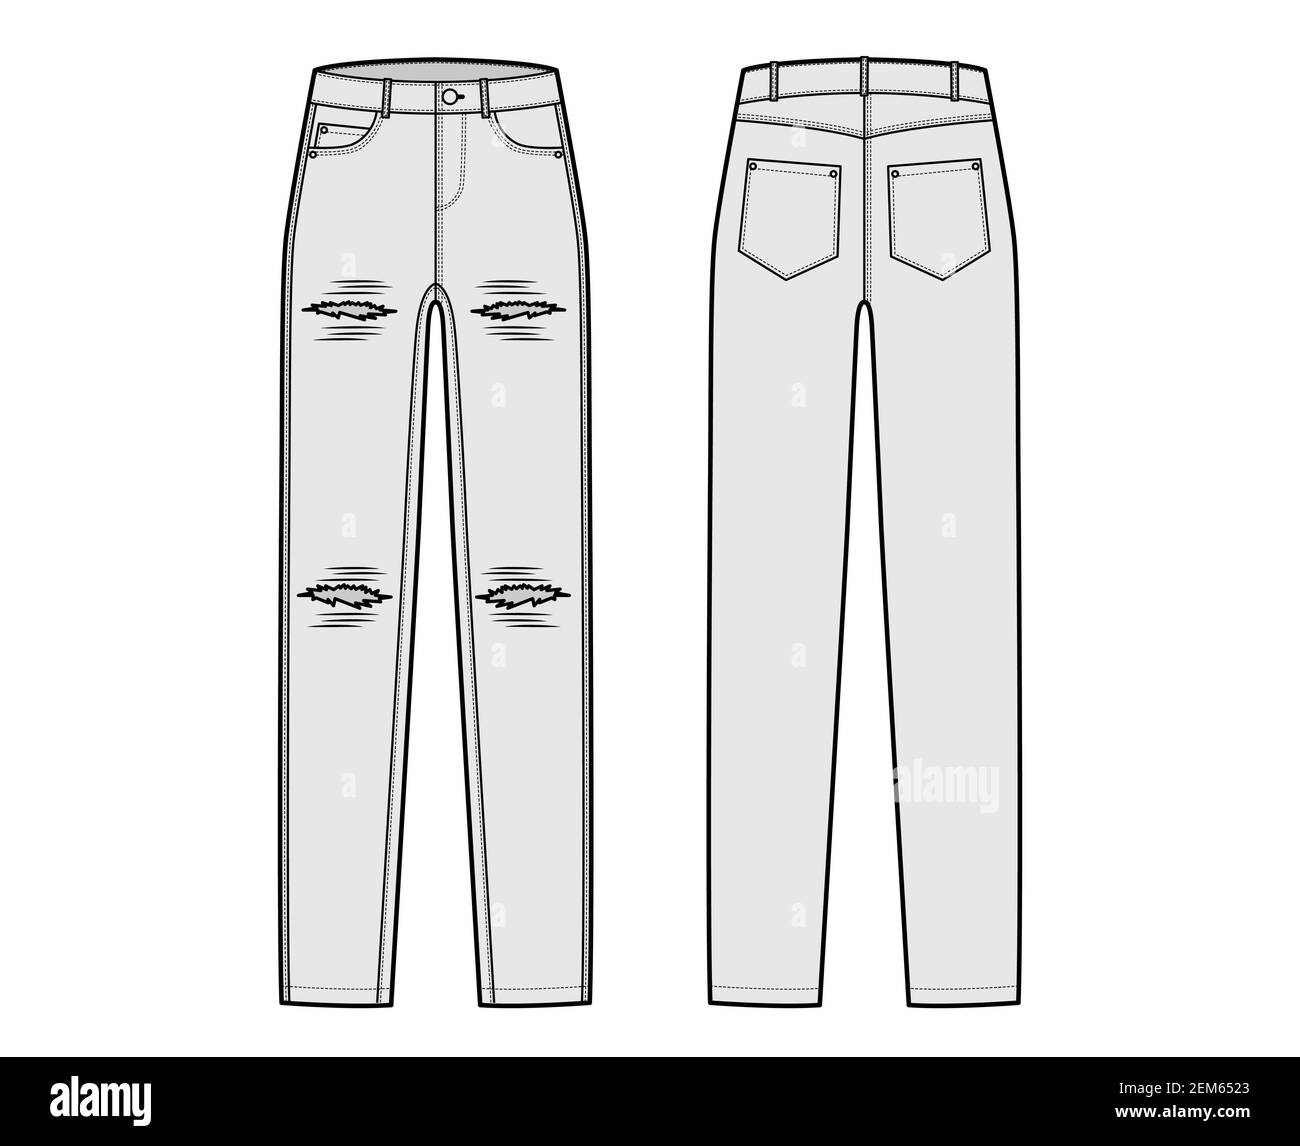 Ripped Jeans distressed Denim pants technical fashion illustration with  full length, low waist, rise, coin, 5